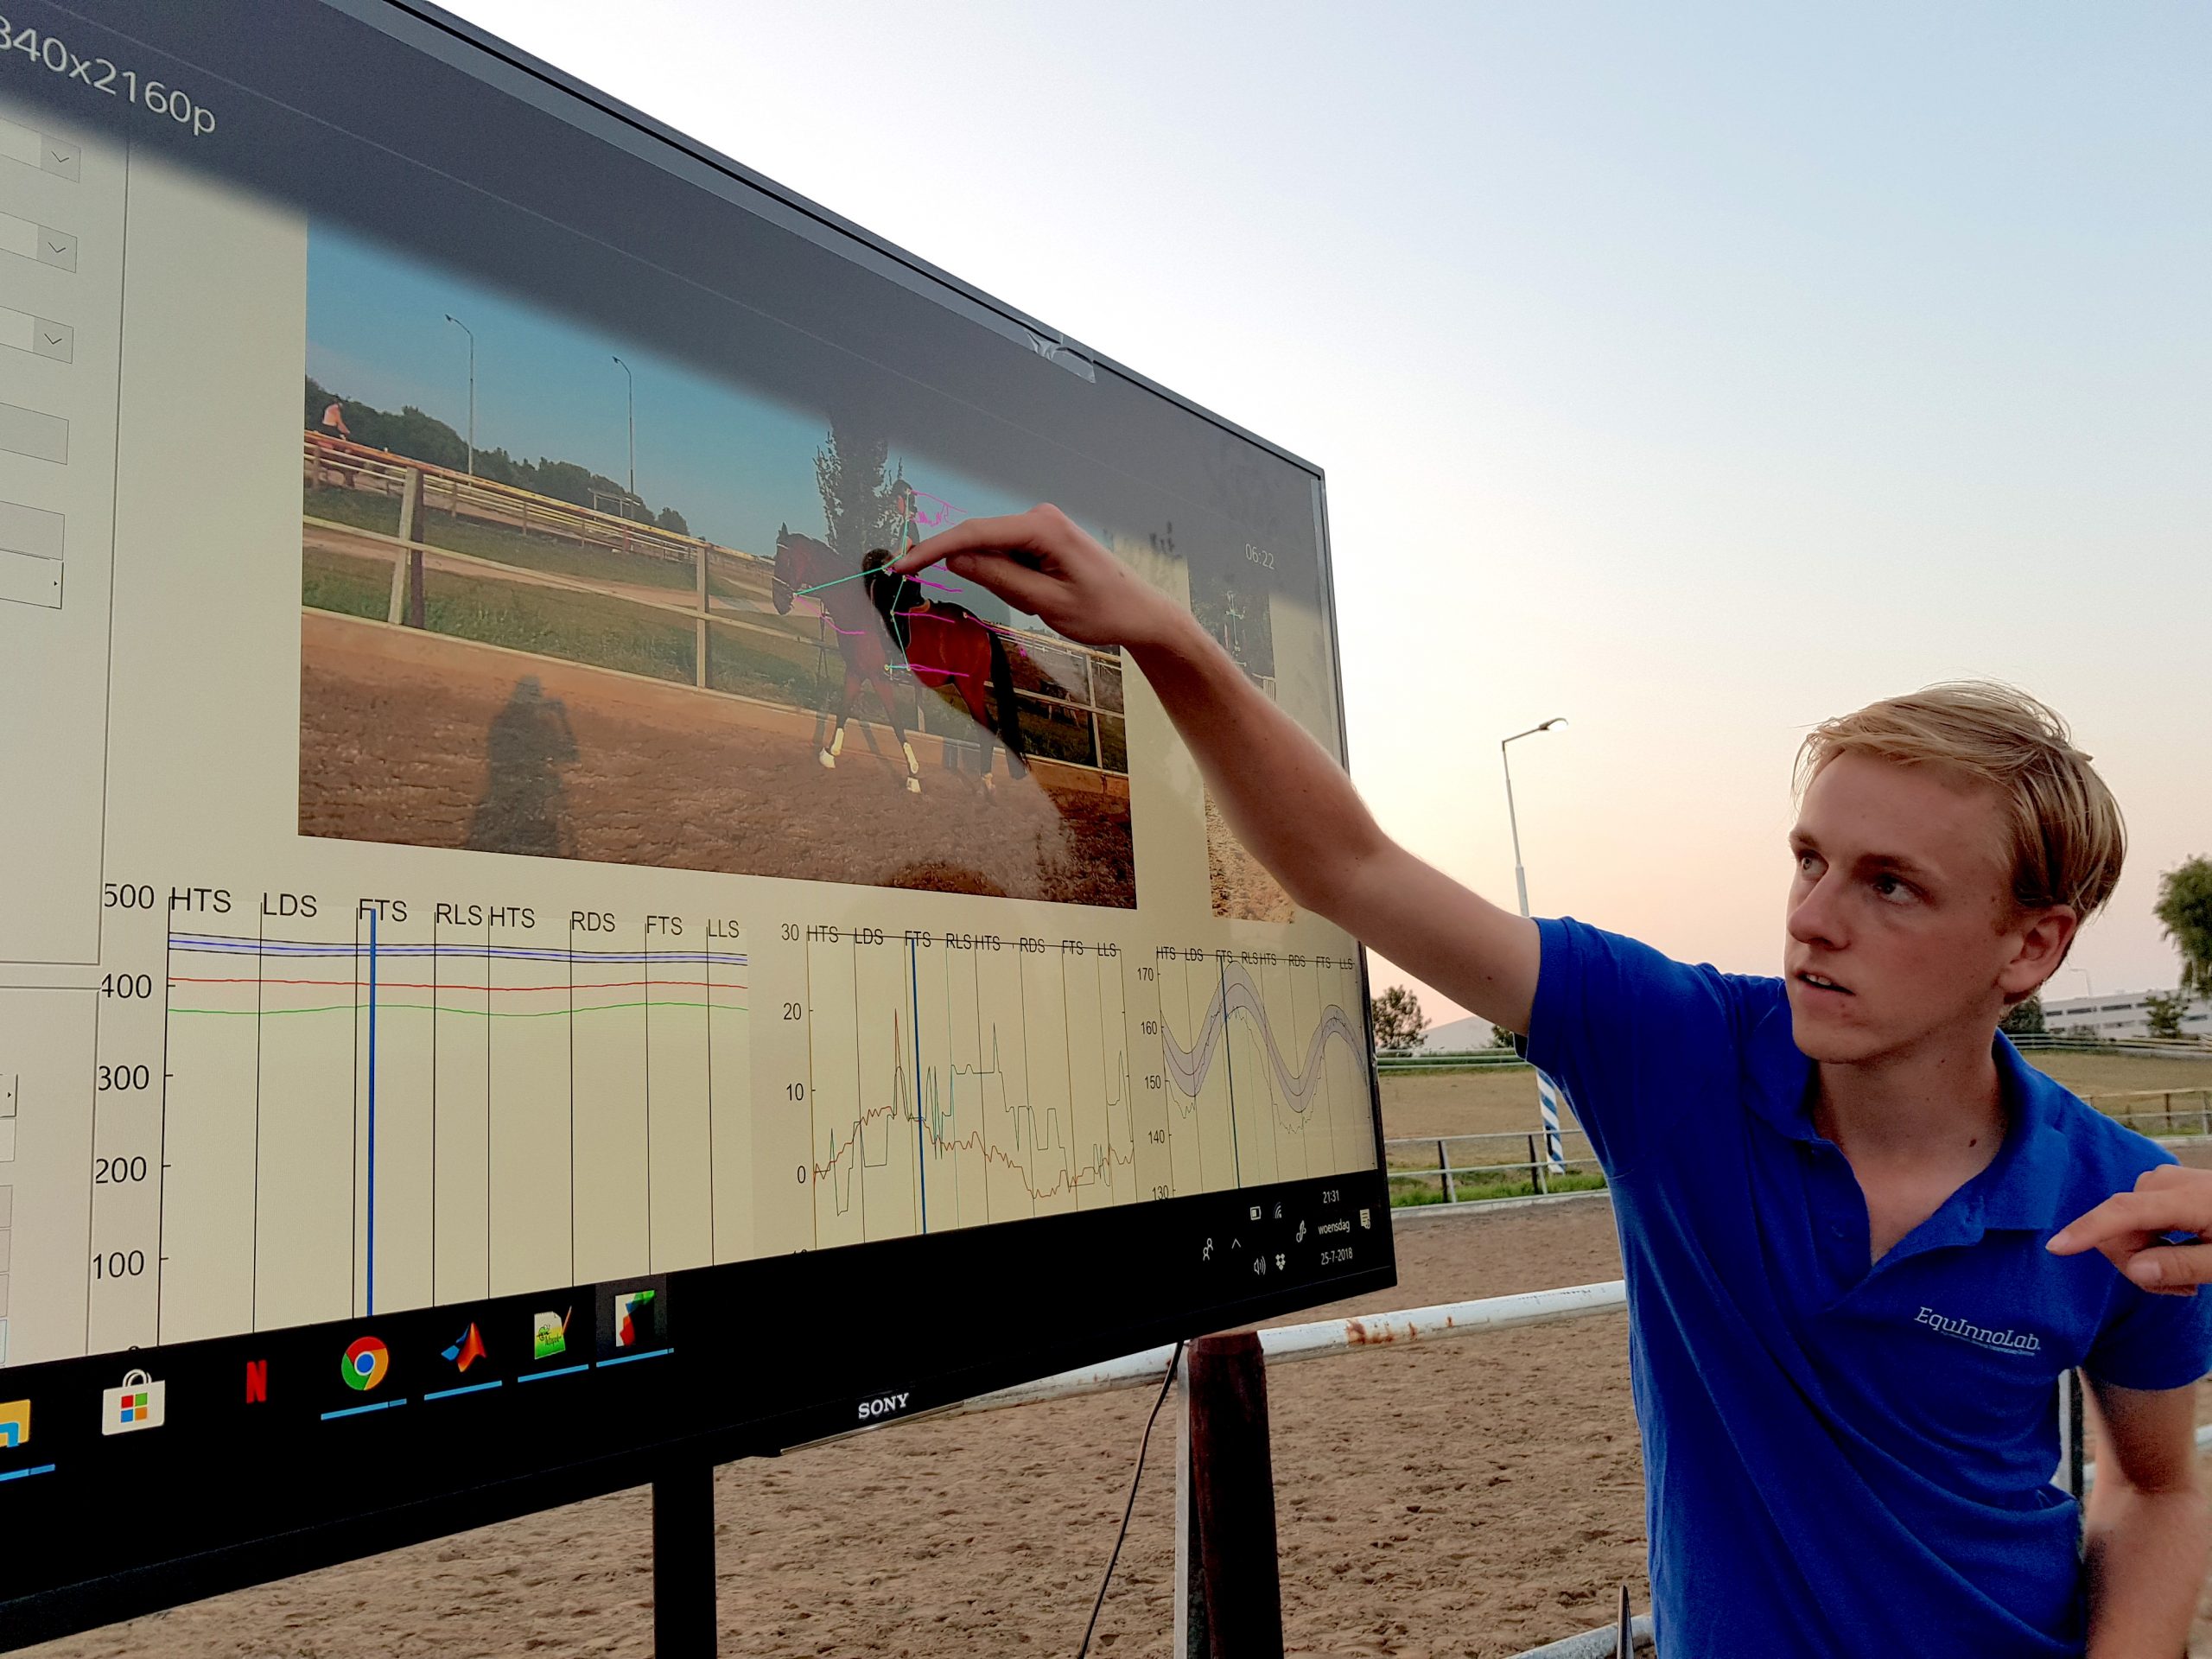 EquInnoLab - expertise and innovation centre for the equestrian sports